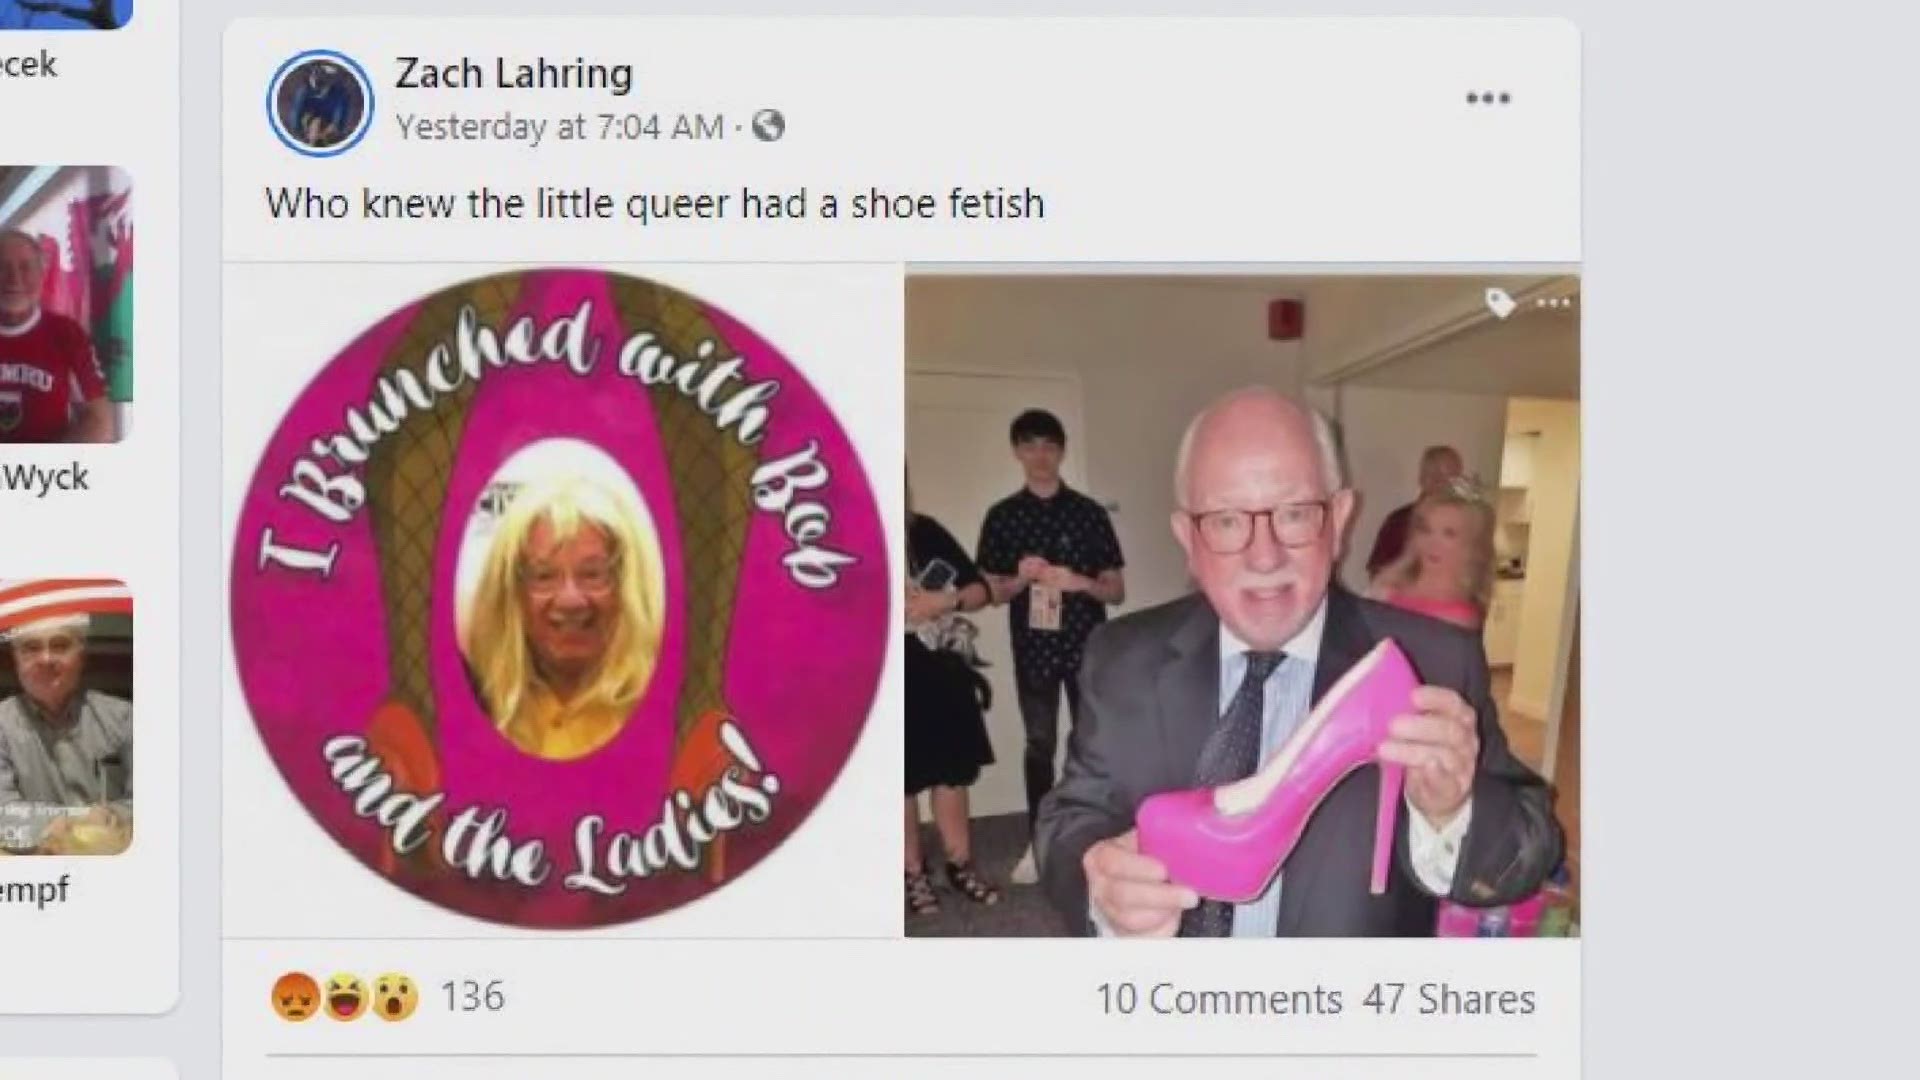 Muskegon County Commissioner Zach Lahring calls Muskegon County Board Chairman and fellow Republican Bob Scolnik "the little queer" in Facebook post.